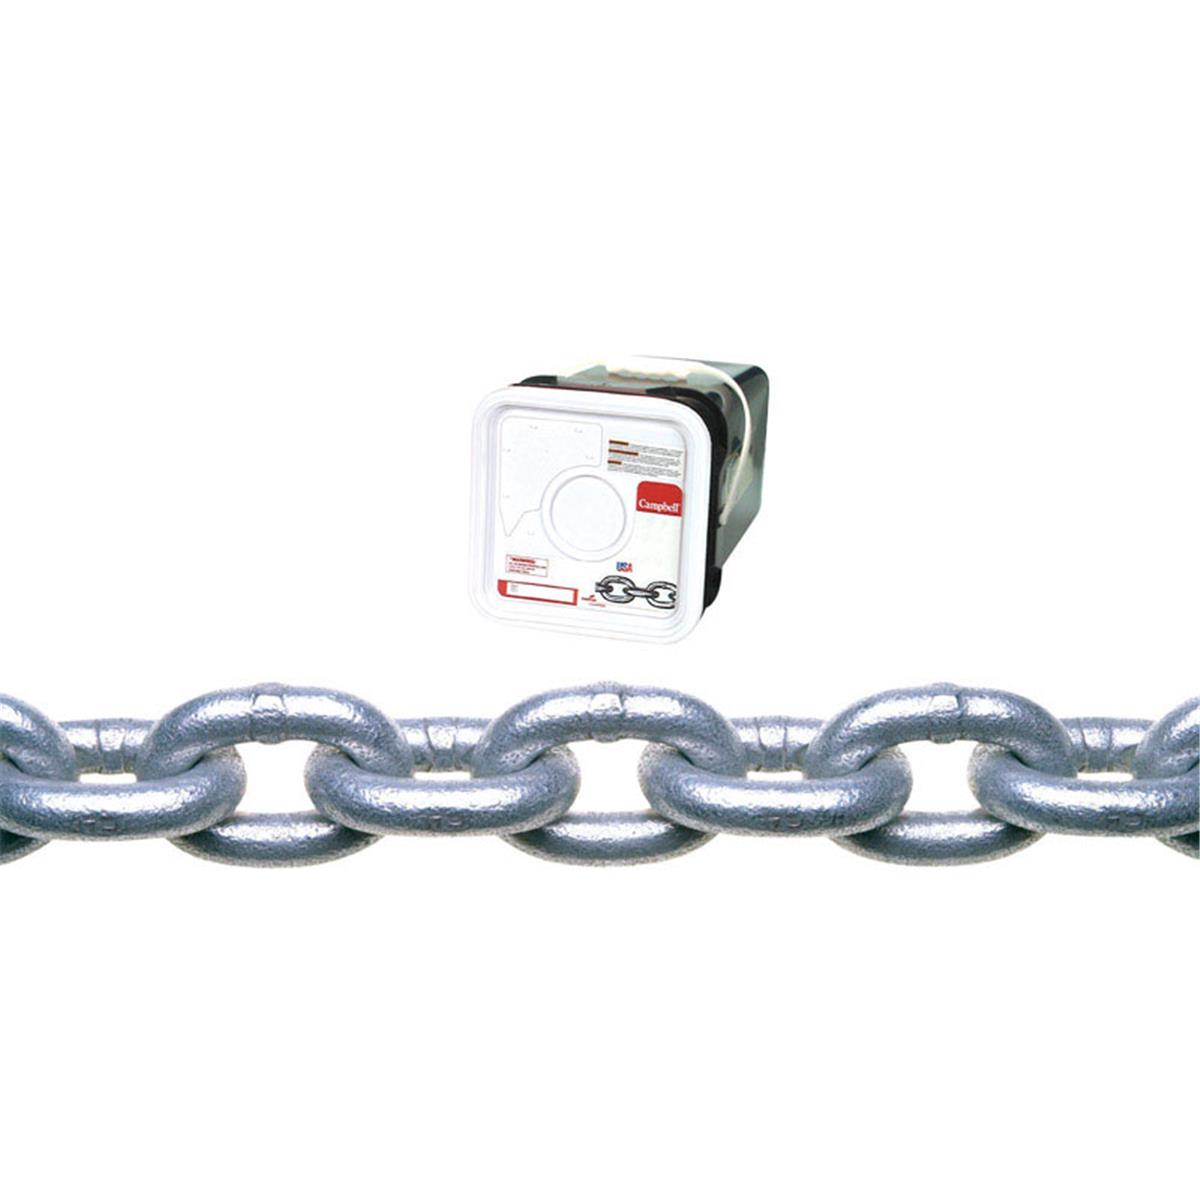 Picture of Apex Tool Group 143536 0.31 in. x 75 ft. Chain Proof Galvanized